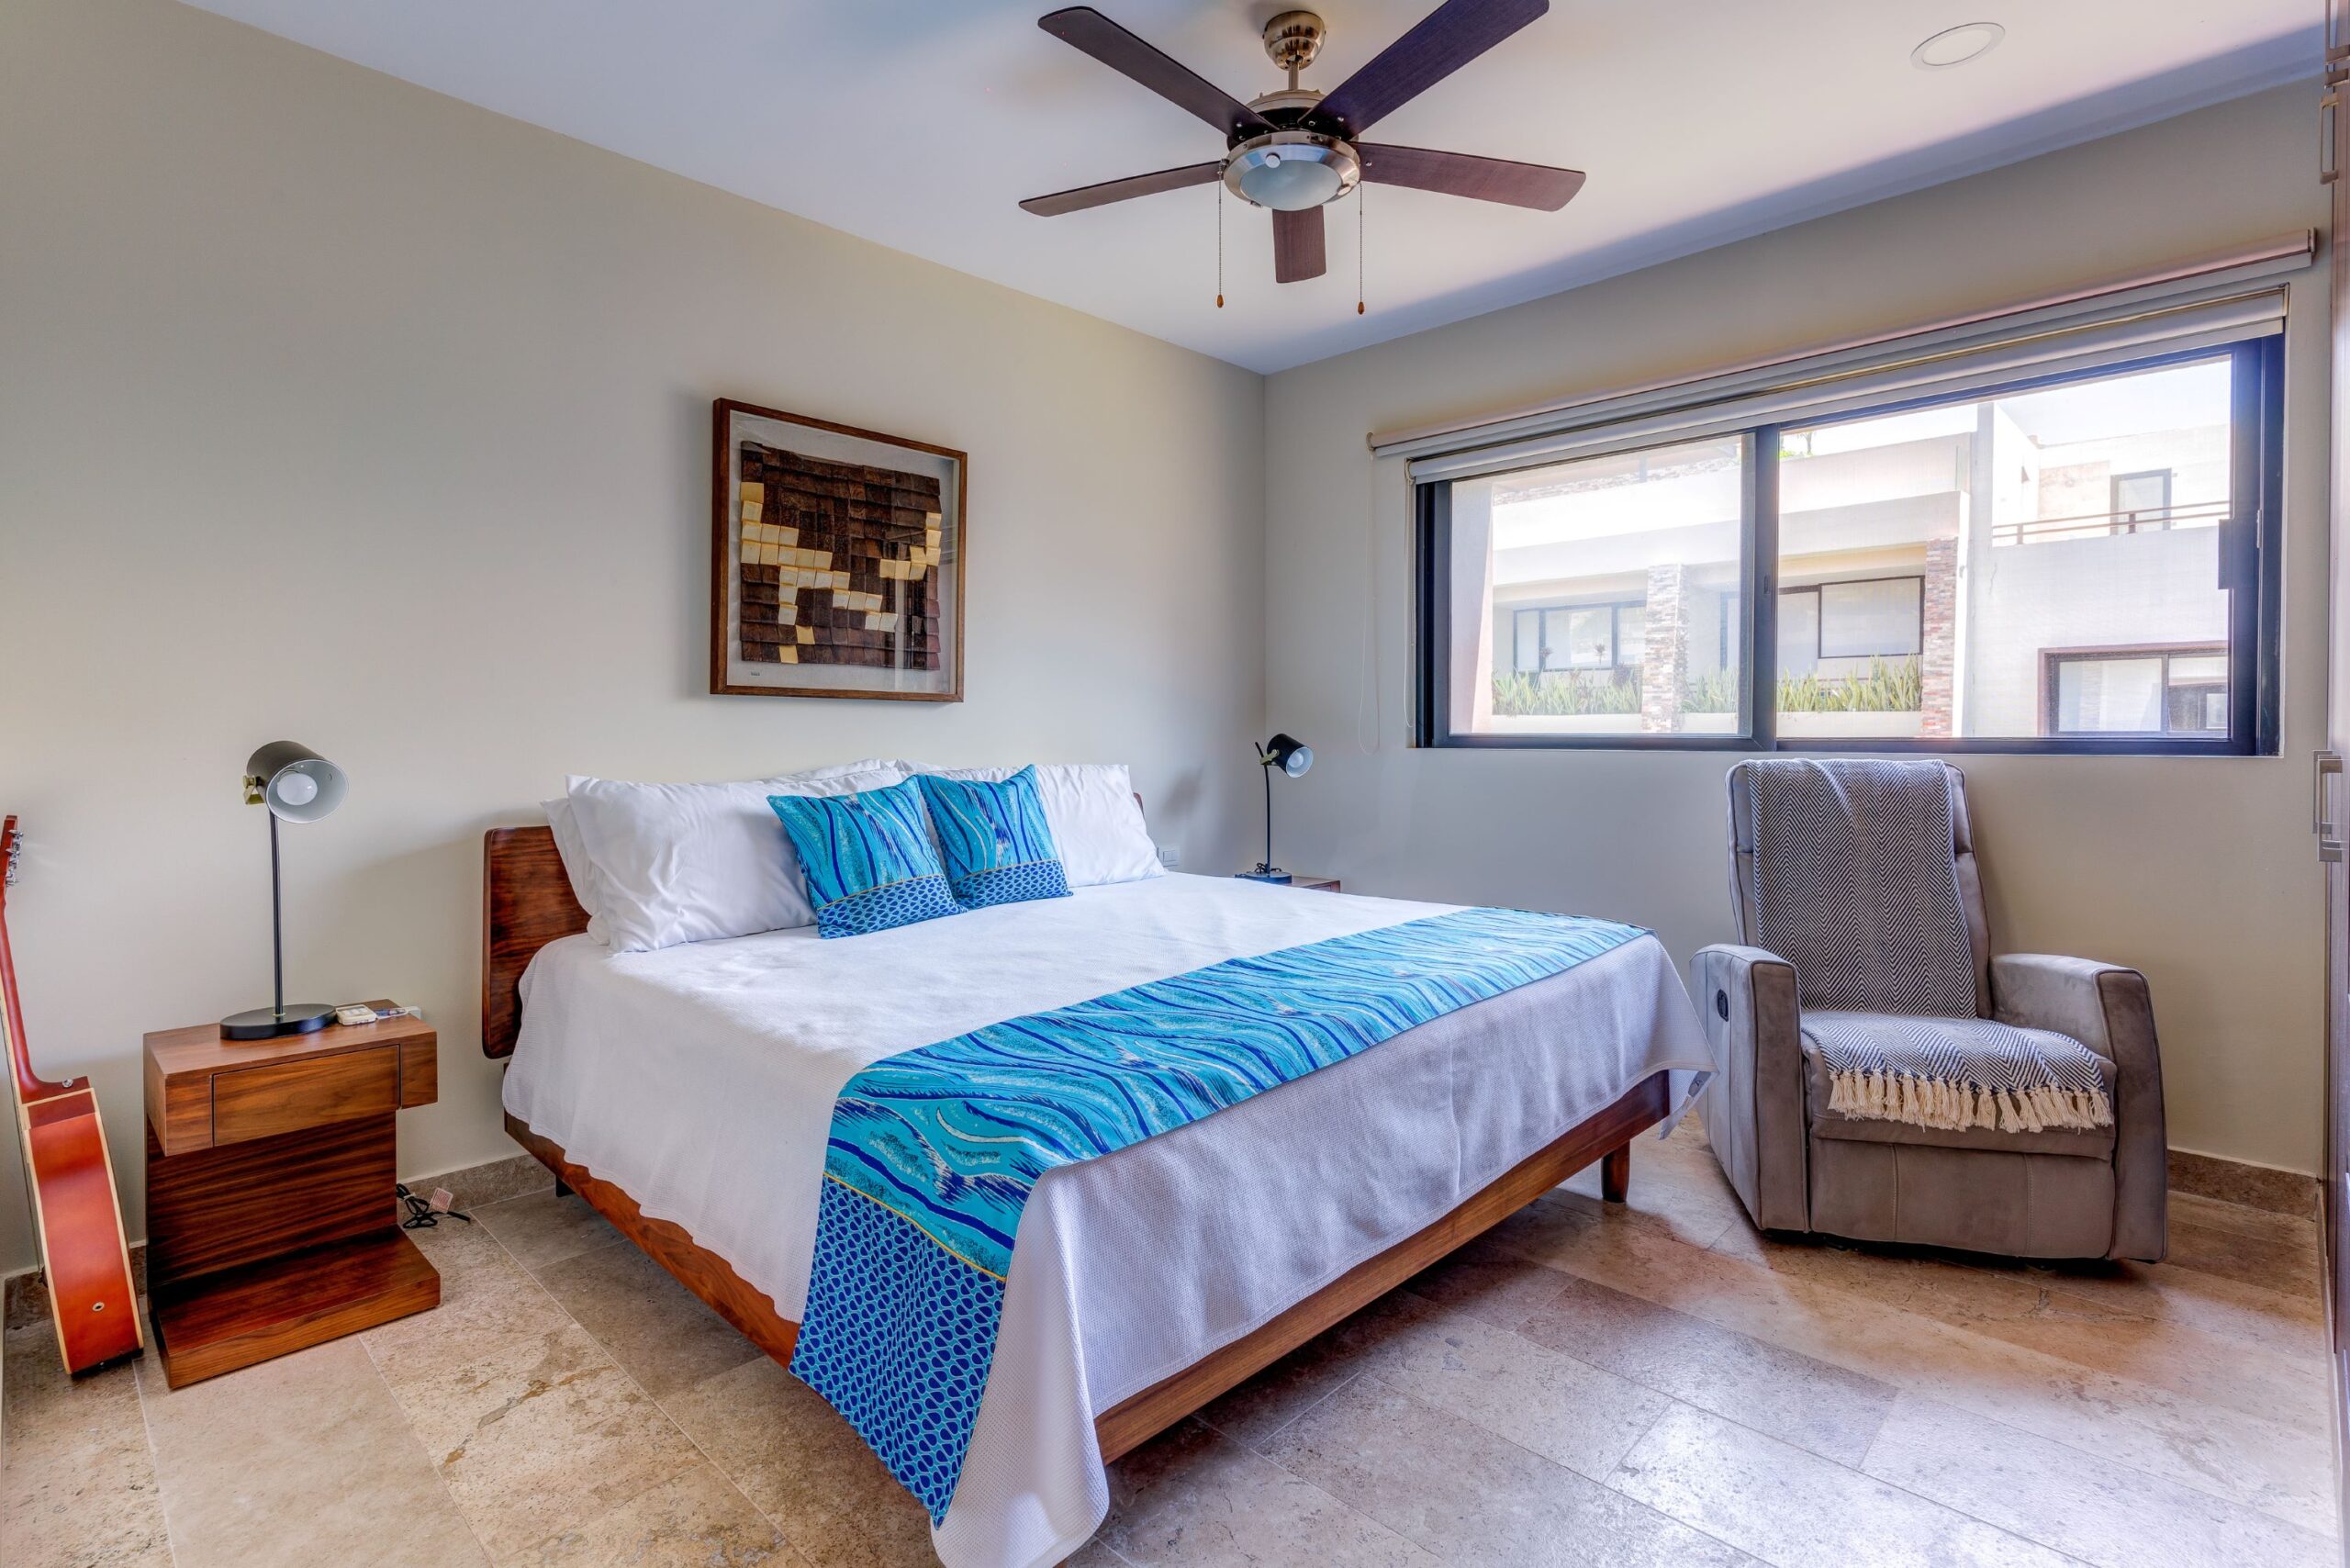 g playa del carmen mexico real estate penthouse arenis master bedroom